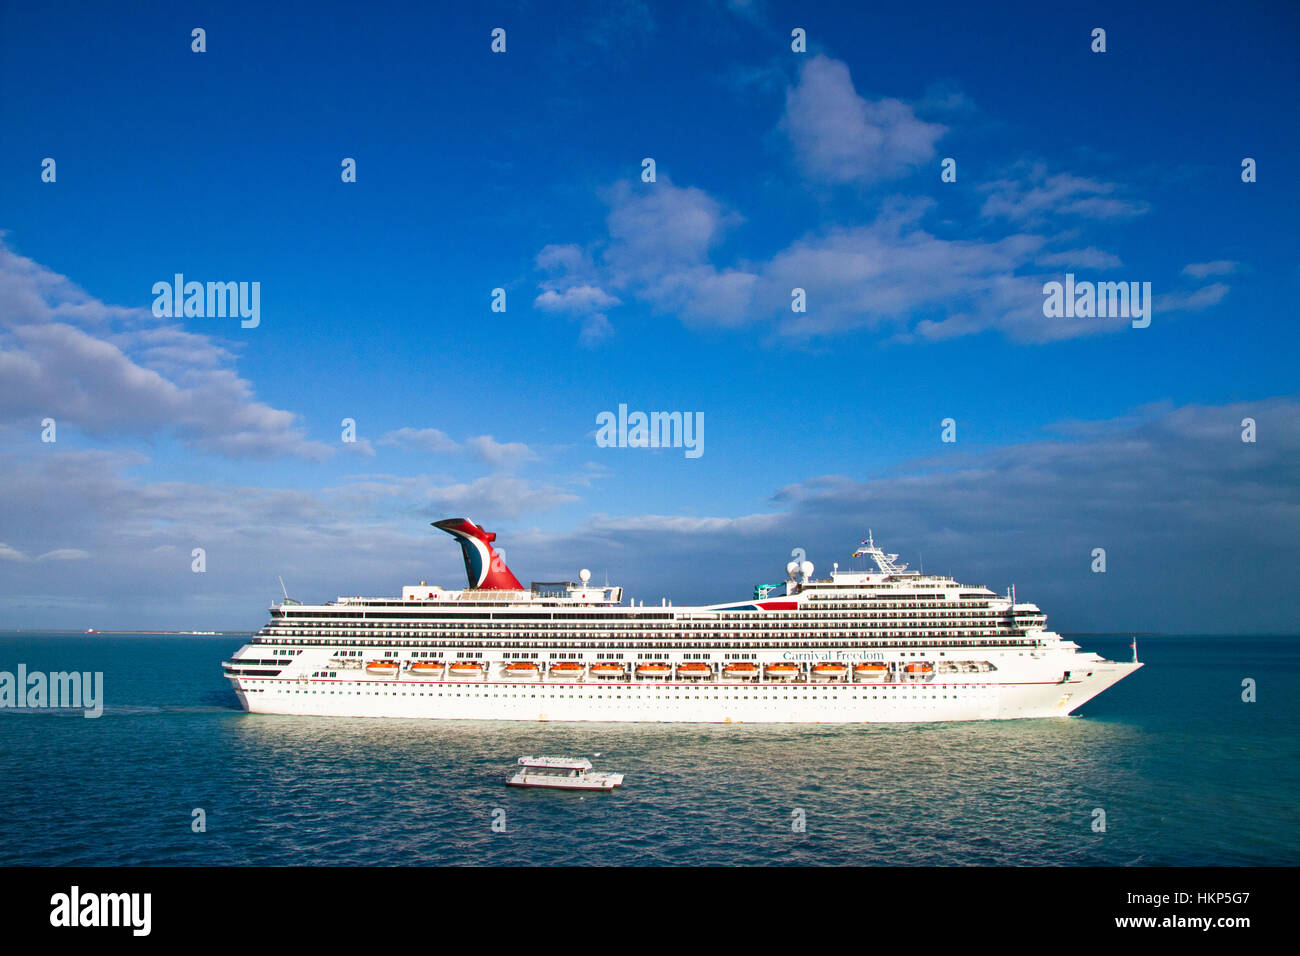 Aerial View of Cruise Ship Carnival Freedom with a tender beside it Stock Photo